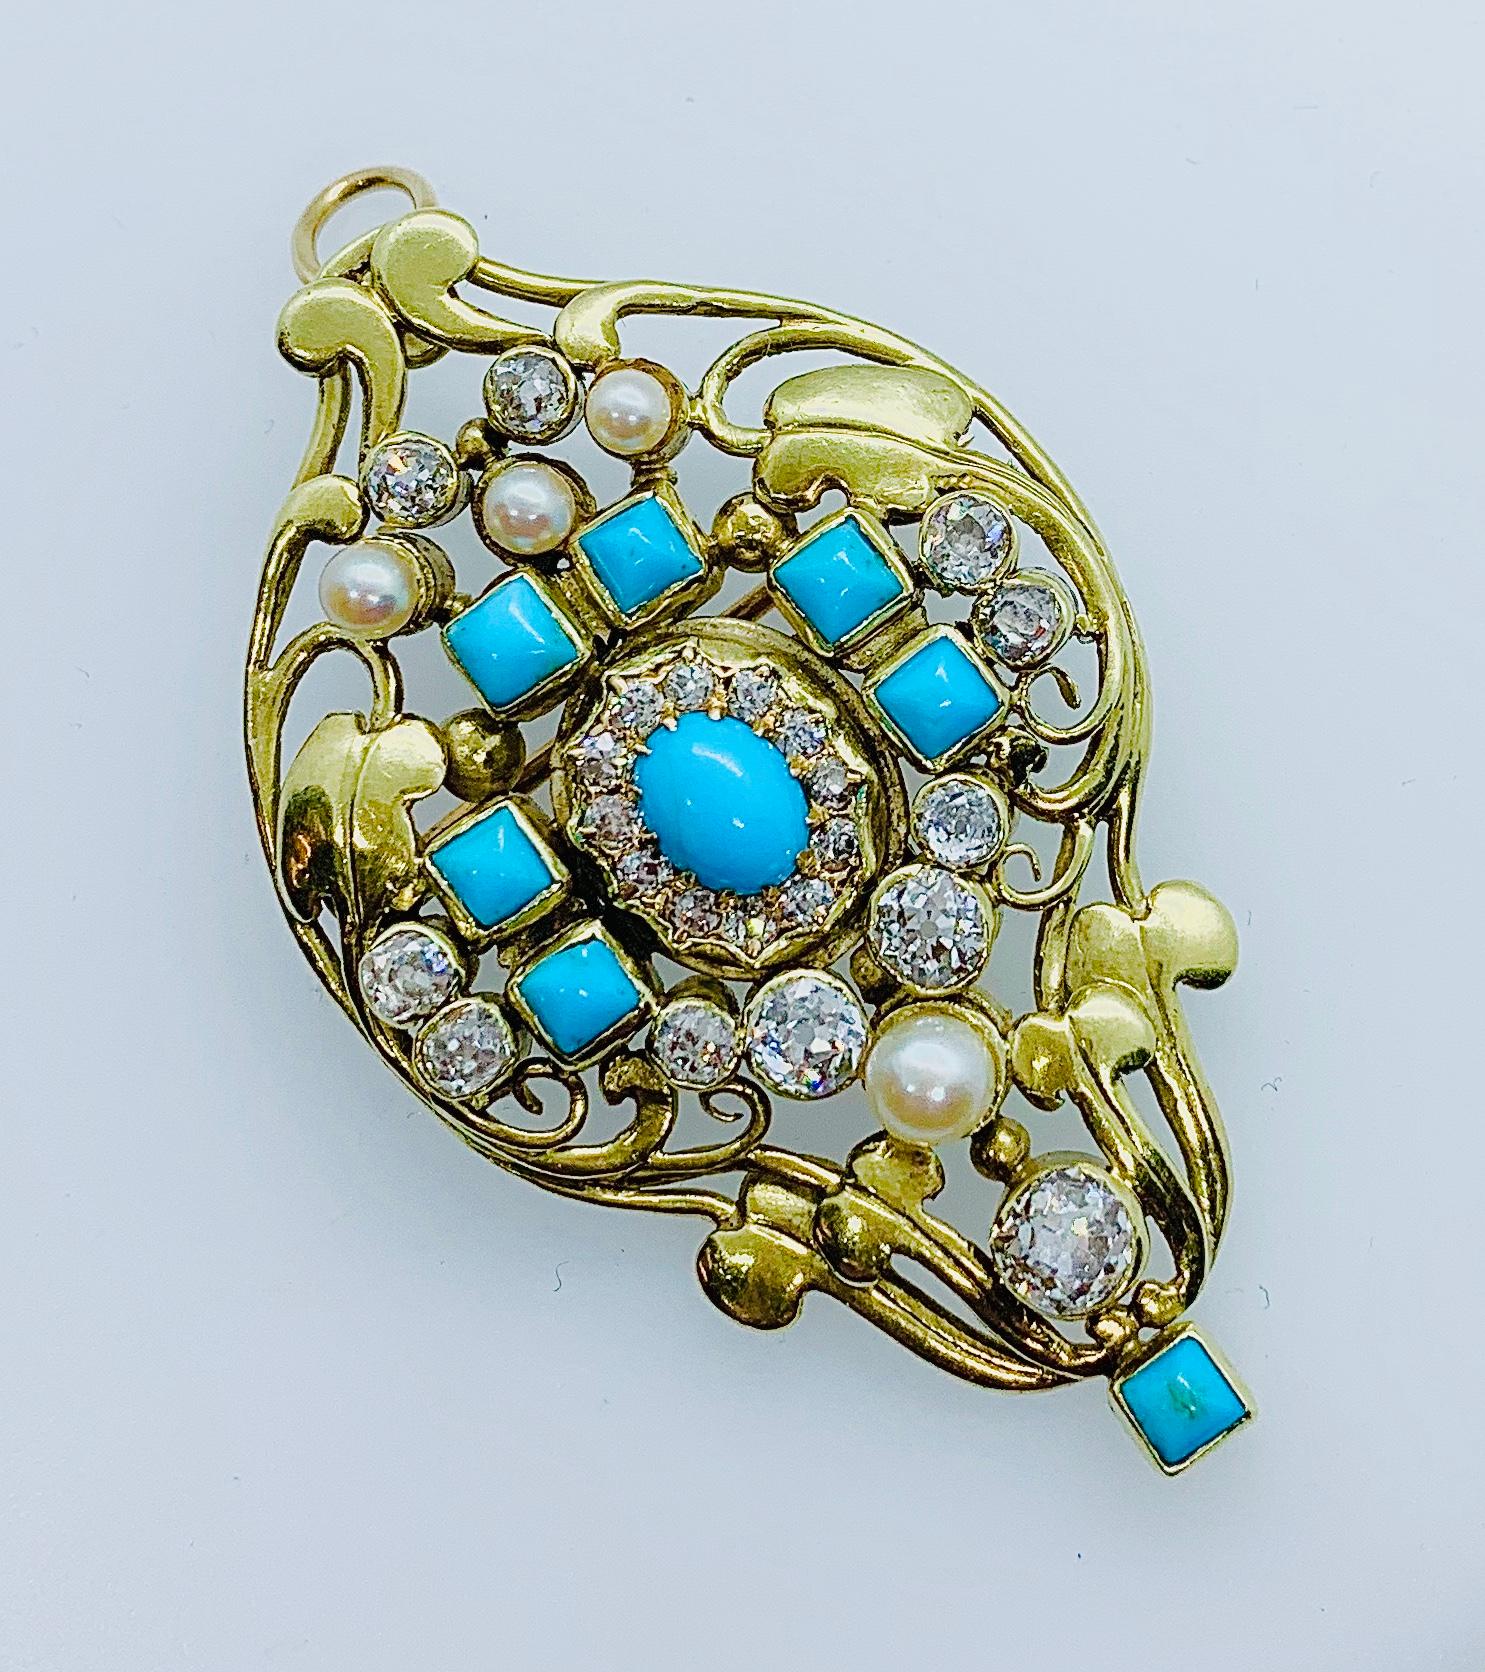 Gorgeous and very Important Arts & Crafts Pendant / Brooch. This piece was designed by Frank Gardner Hale. It is made in 14 k yellow Gold and features 23 Old Mine Cut Diamonds with an estimated Carat weight of 1.50, four natural pearls, seven square